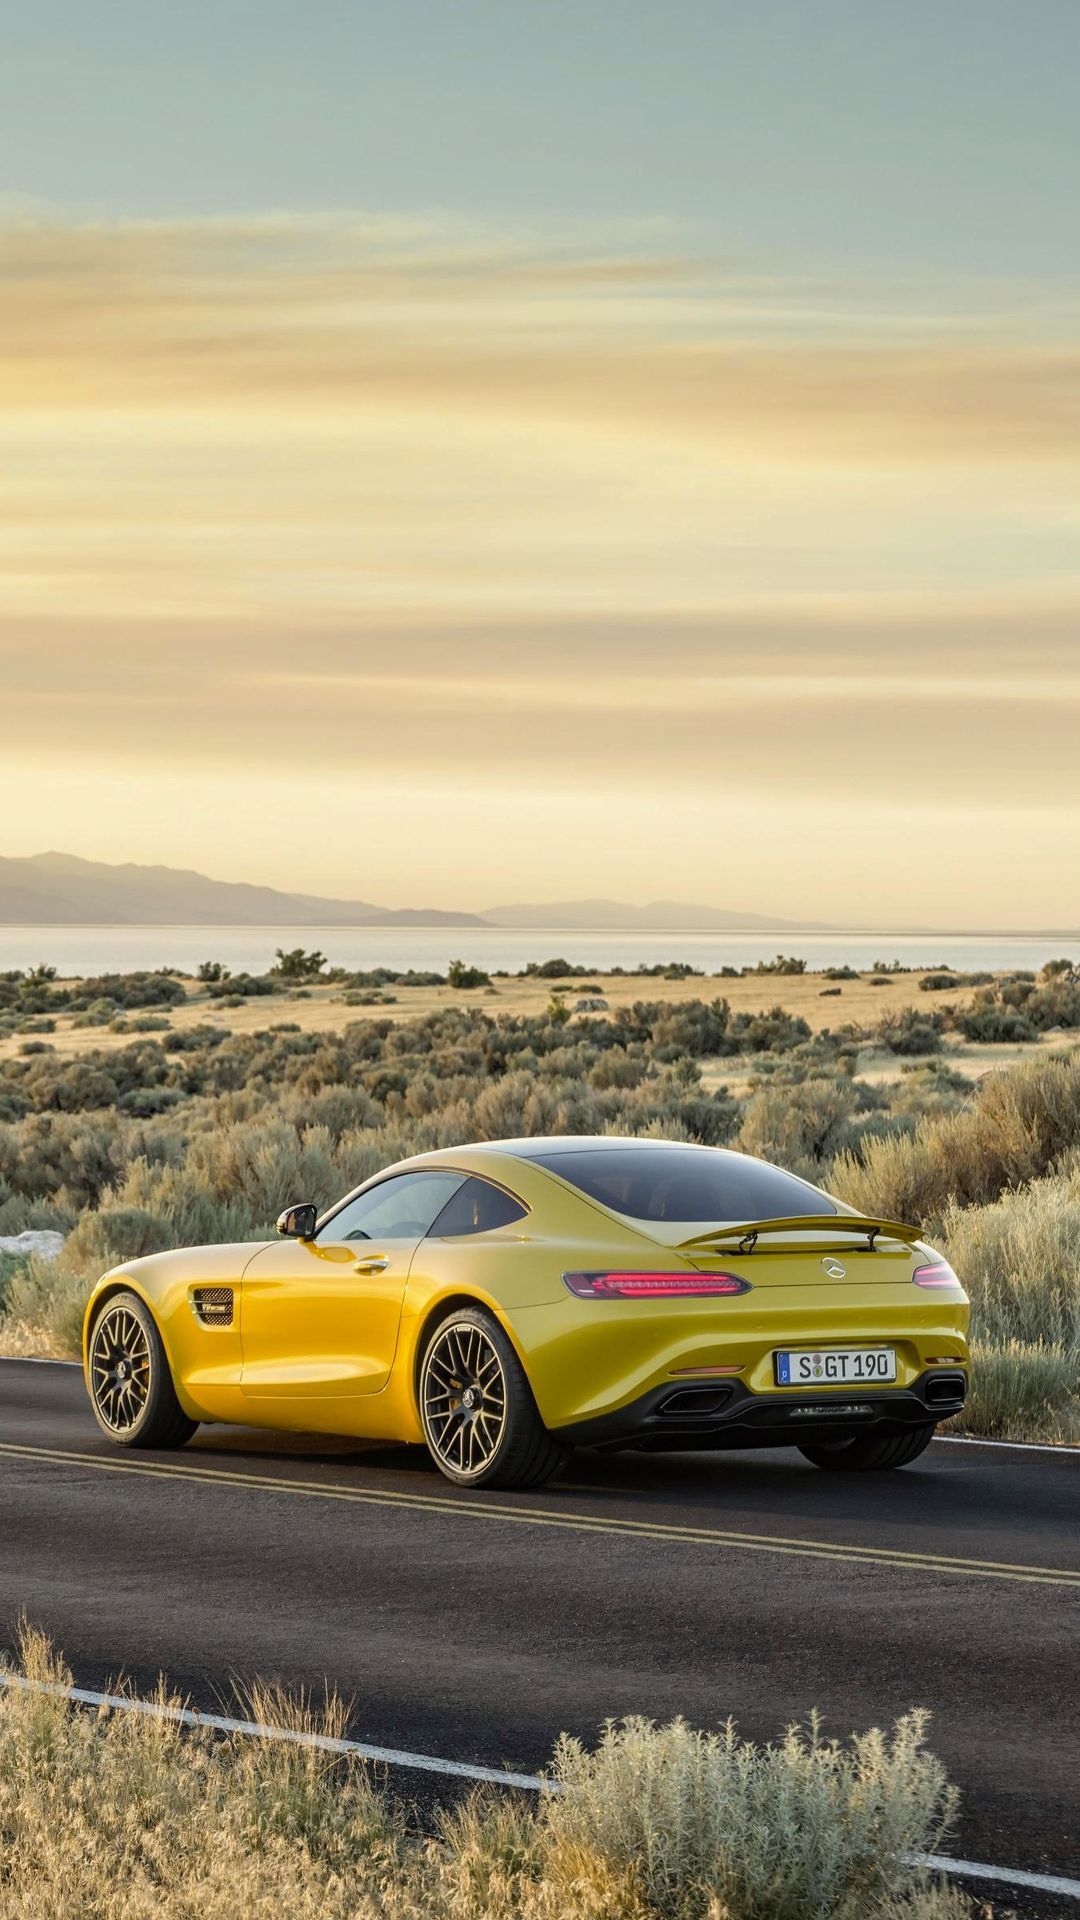 Give Your Desktop And Mobile A Mercedes Makeover With These Gorgeous AMG GT Wallpaper